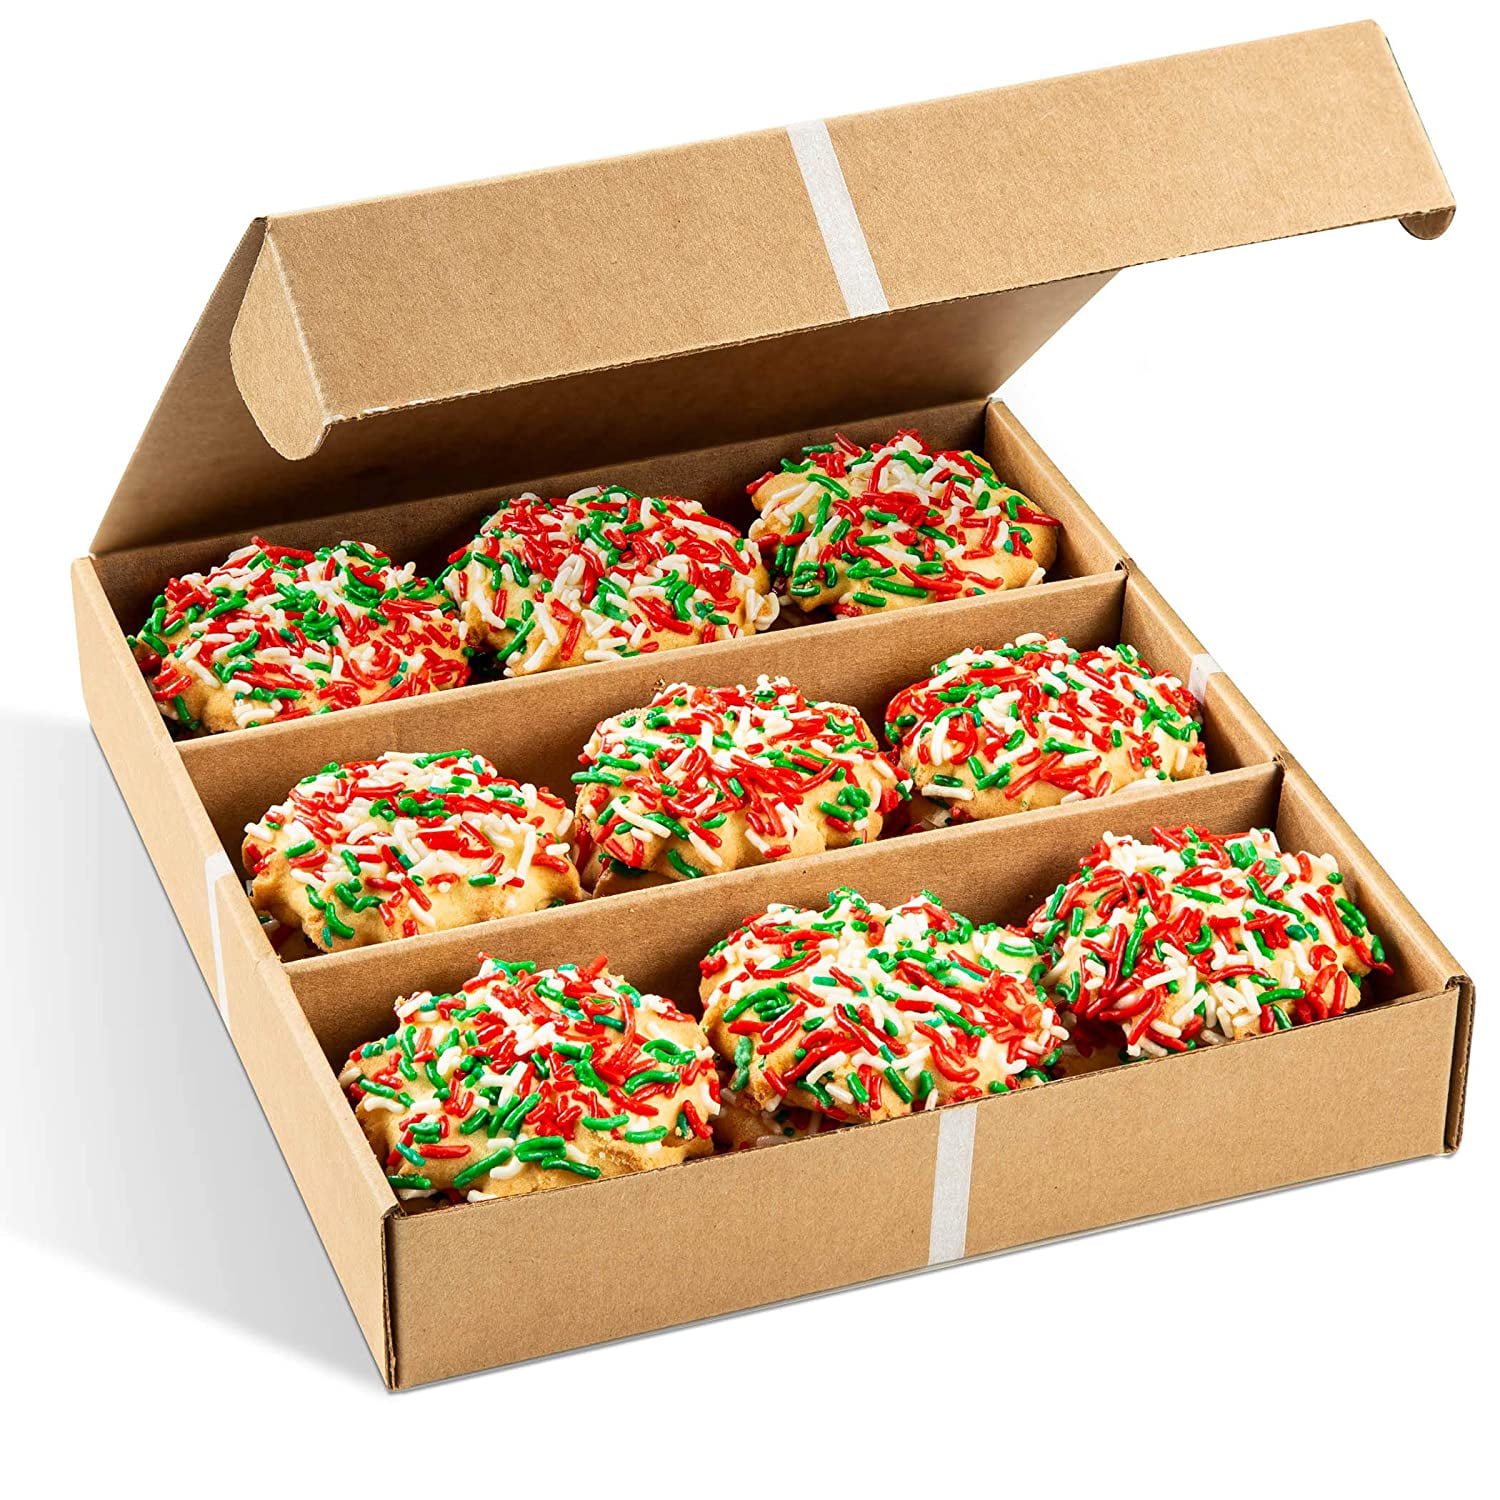  Best Cookies – 3 lb. Gourmet Italian Christmas Cookie Platter,  Holiday Assortment Cookies, Italian cookies for Thanksgiving, Birthdays,  Ester and Valentines Day Gifts, 70+ Cookie Gift Basket : Grocery & Gourmet  Food